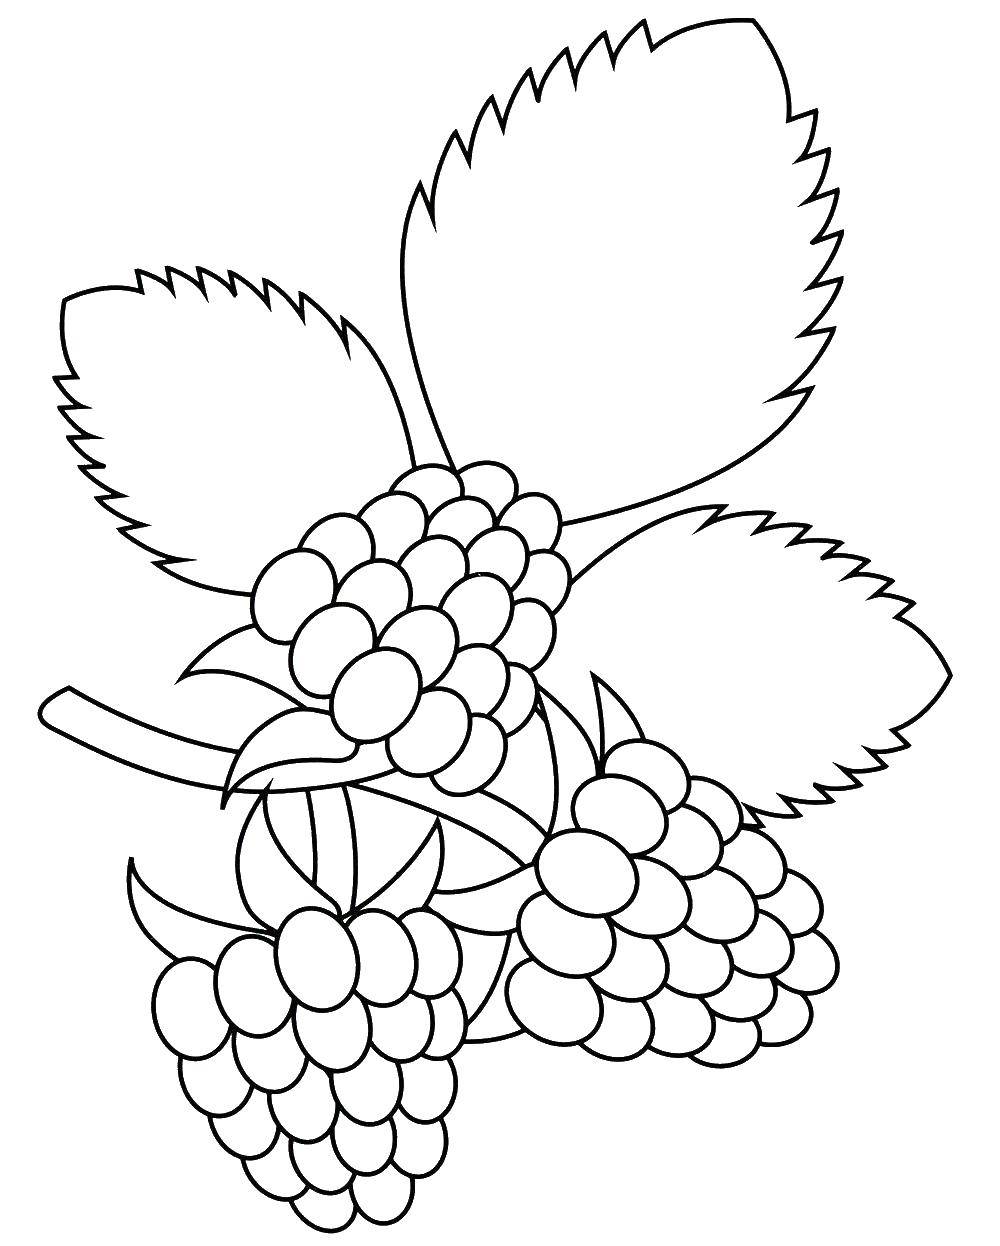 Coloring A lot of BlackBerry. Category berries. Tags:  Berries.